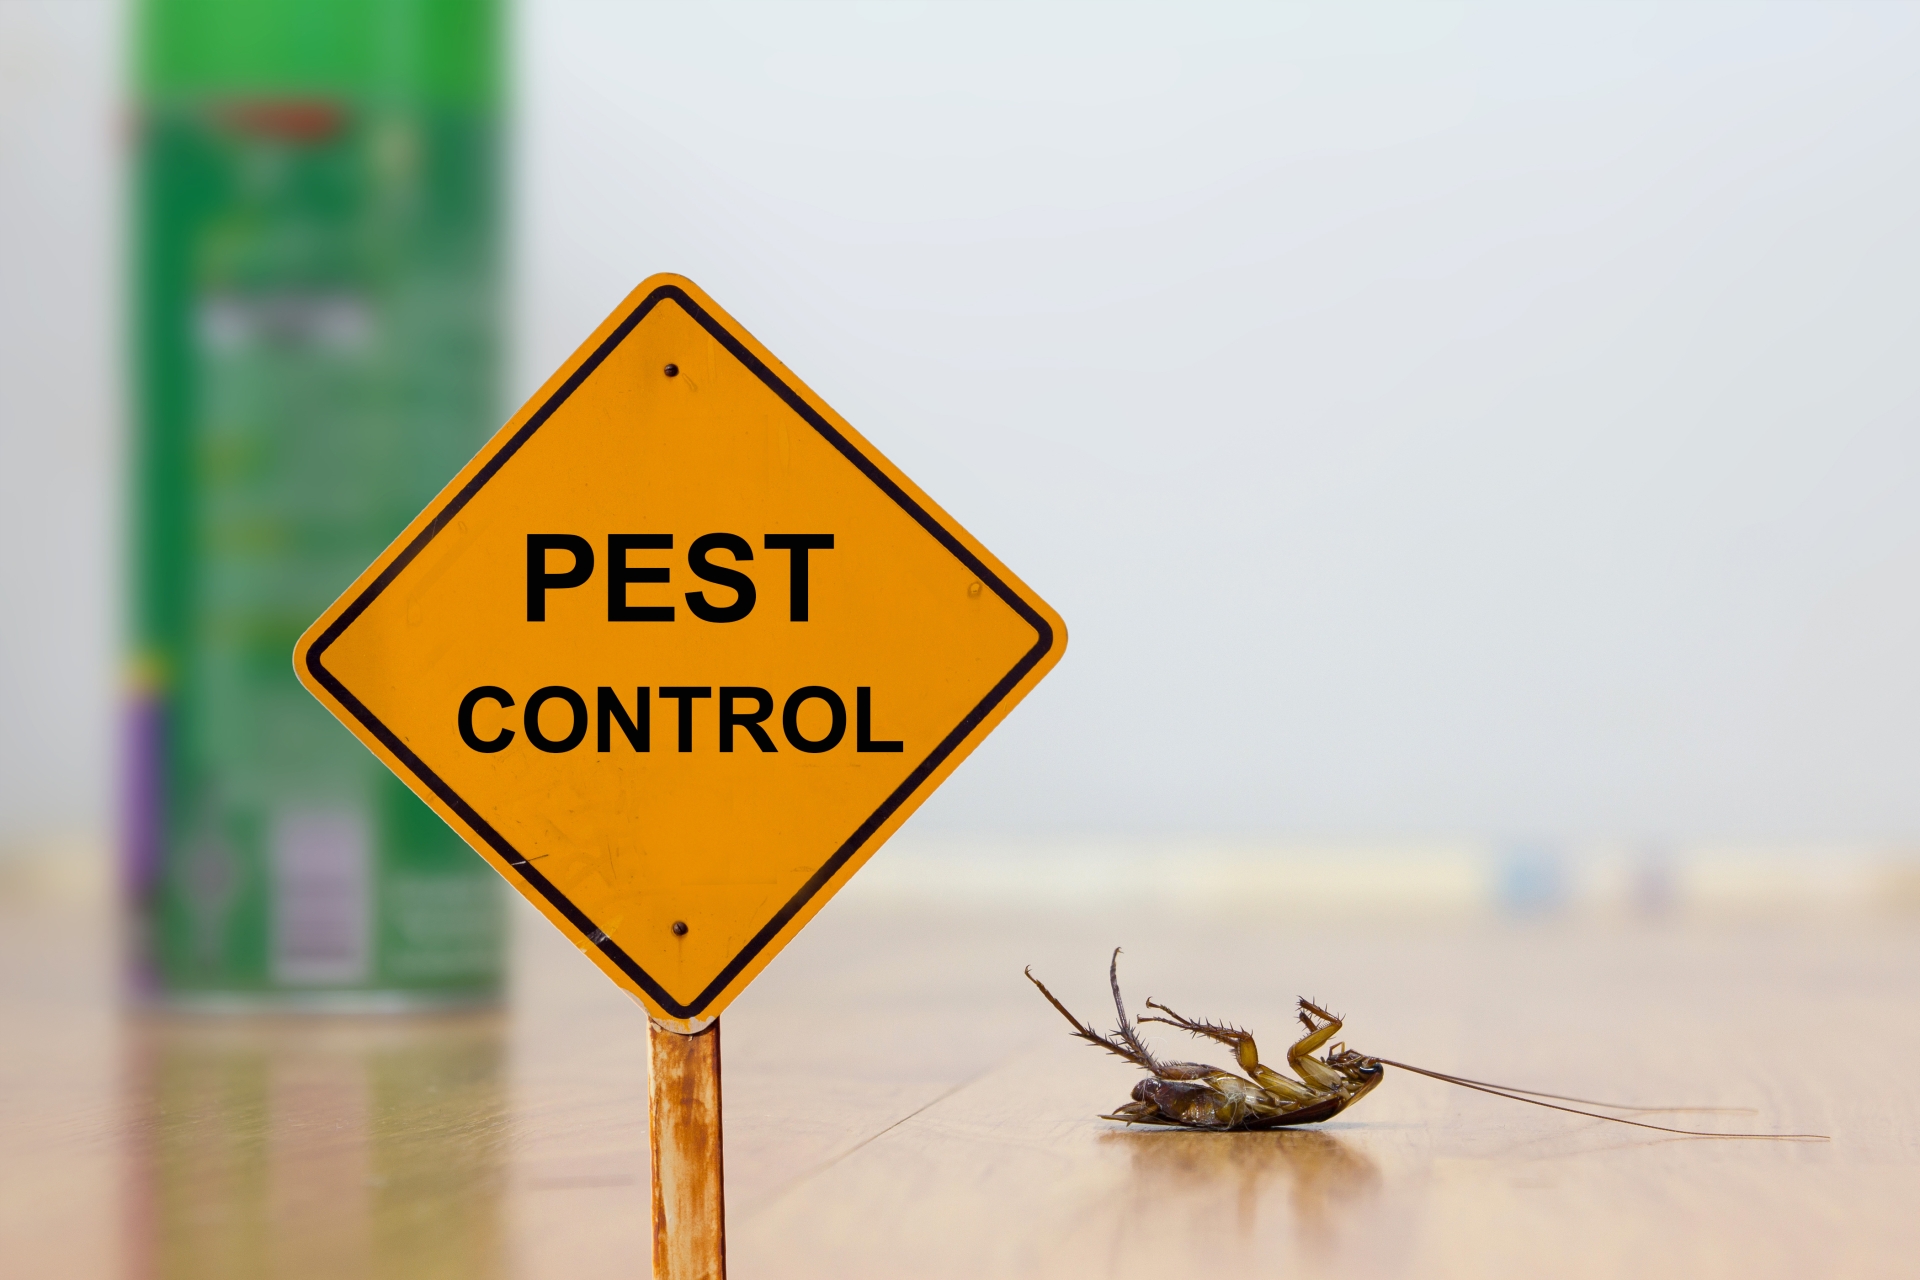 24 Hour Pest Control, Pest Control in West Horsley, East Horsley, Effingham, KT24. Call Now 020 8166 9746